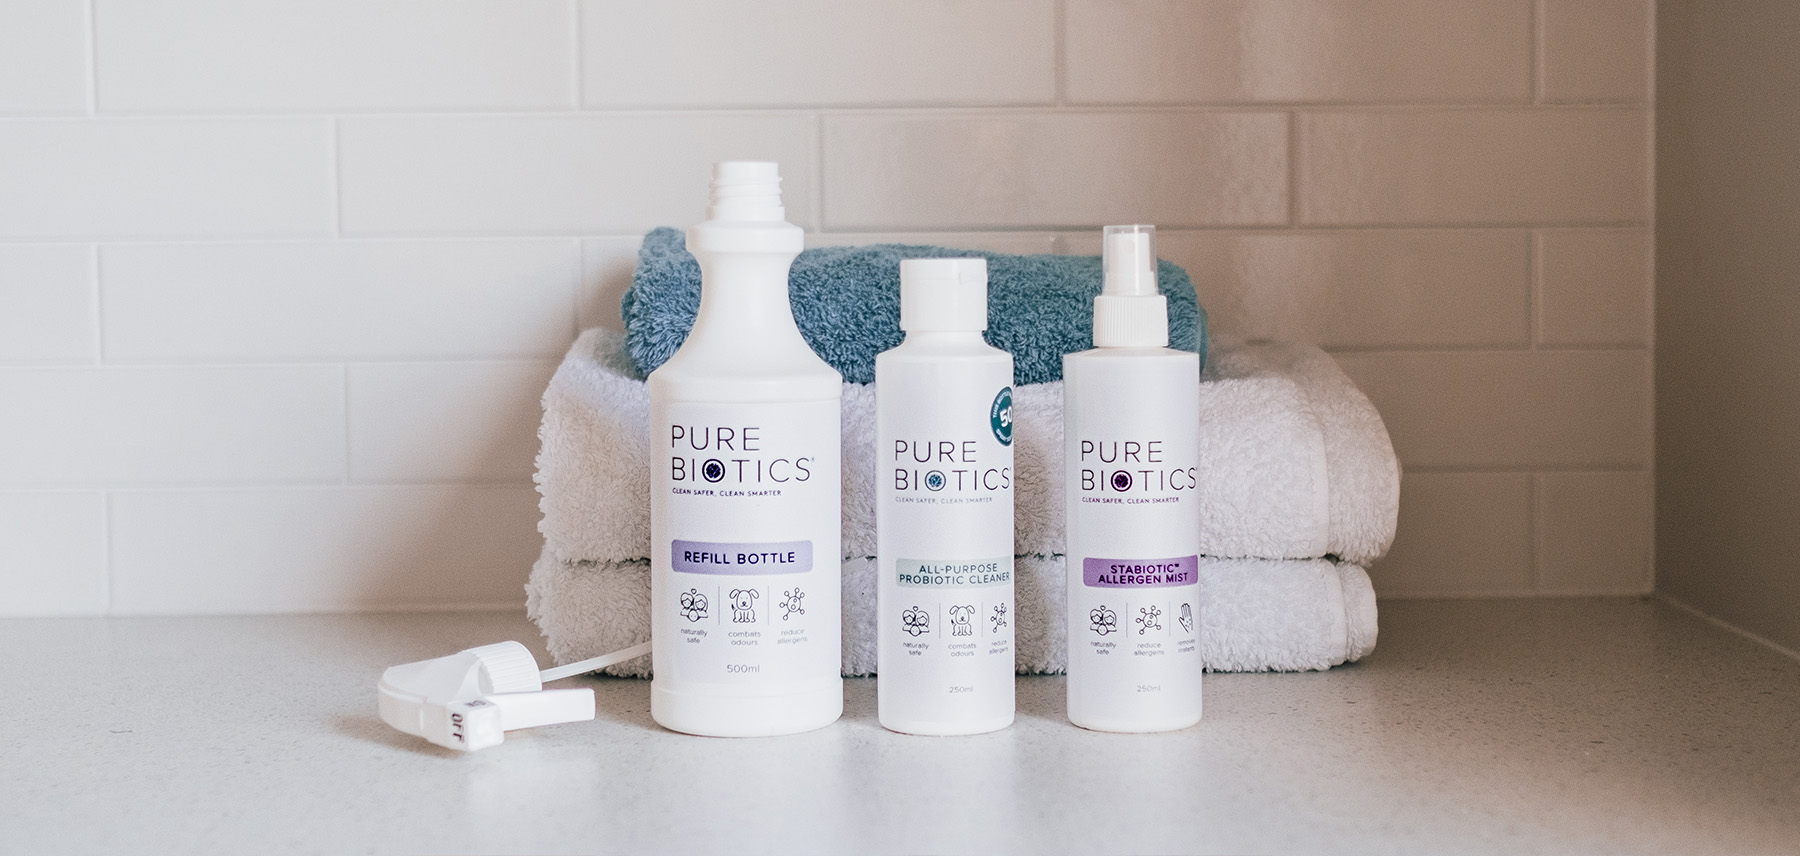 Pure Bitoics cleaning range, 3 white bottles with green and purple logos on them standing in front of a white tiled wall